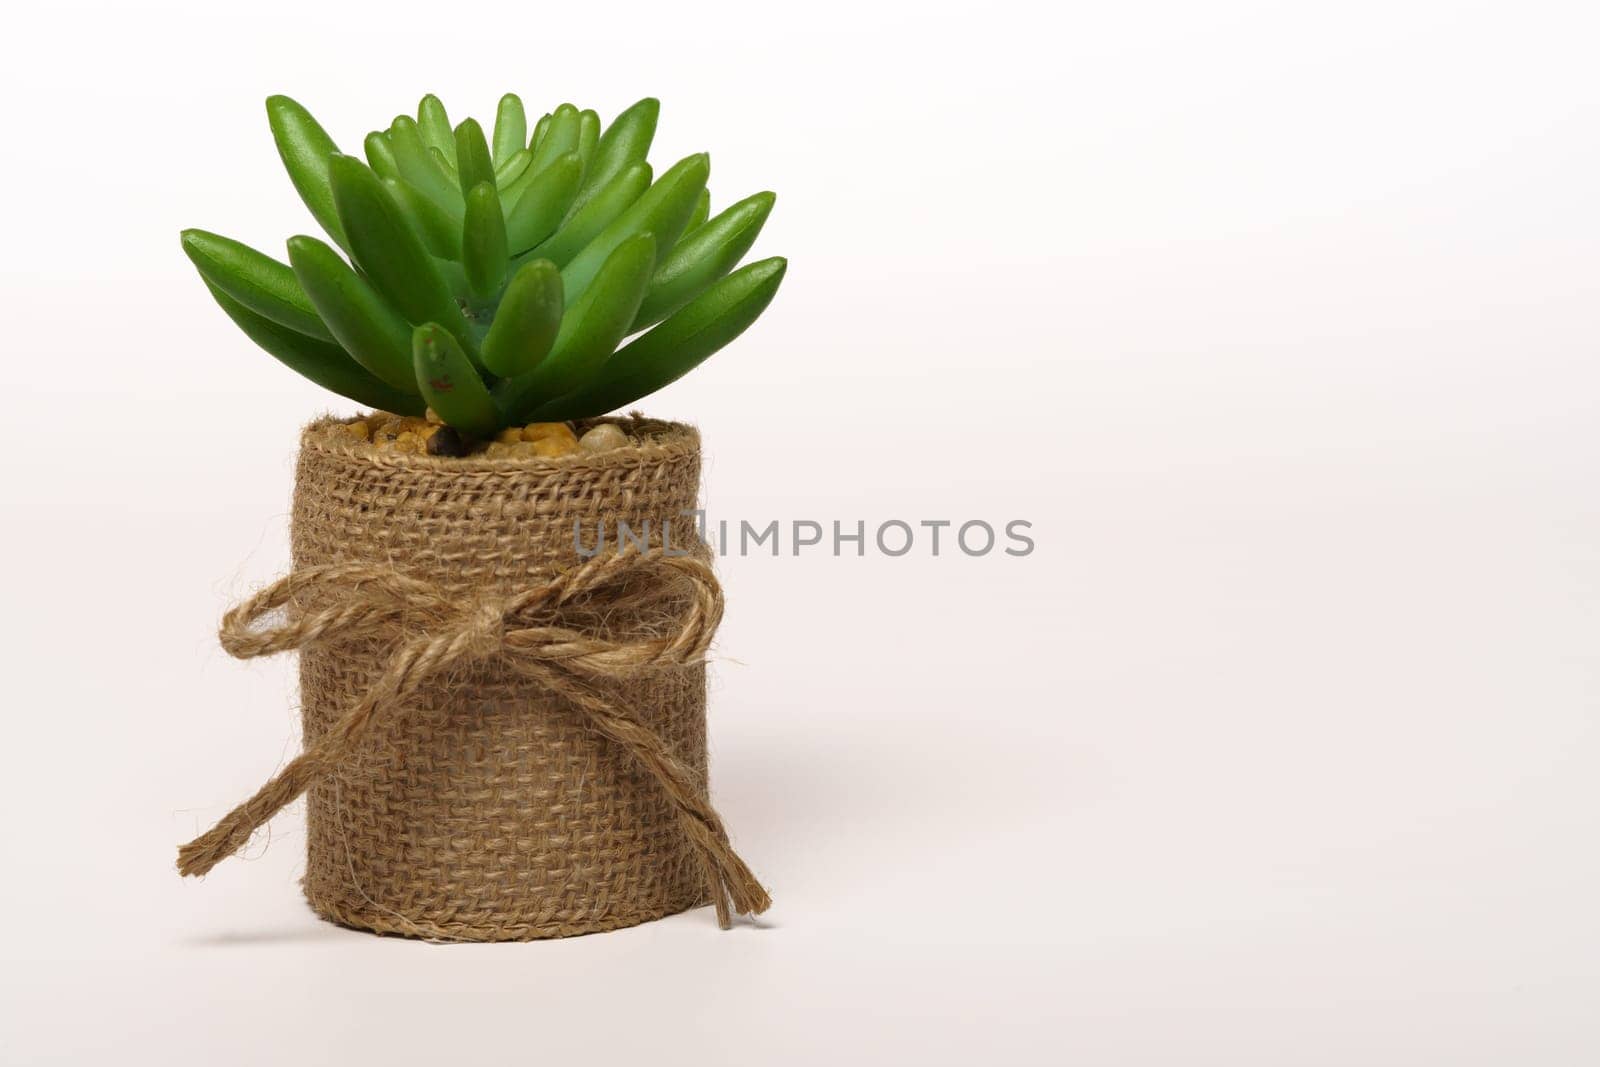 Succulent plant wrapped in a burlap bag isolated on white background